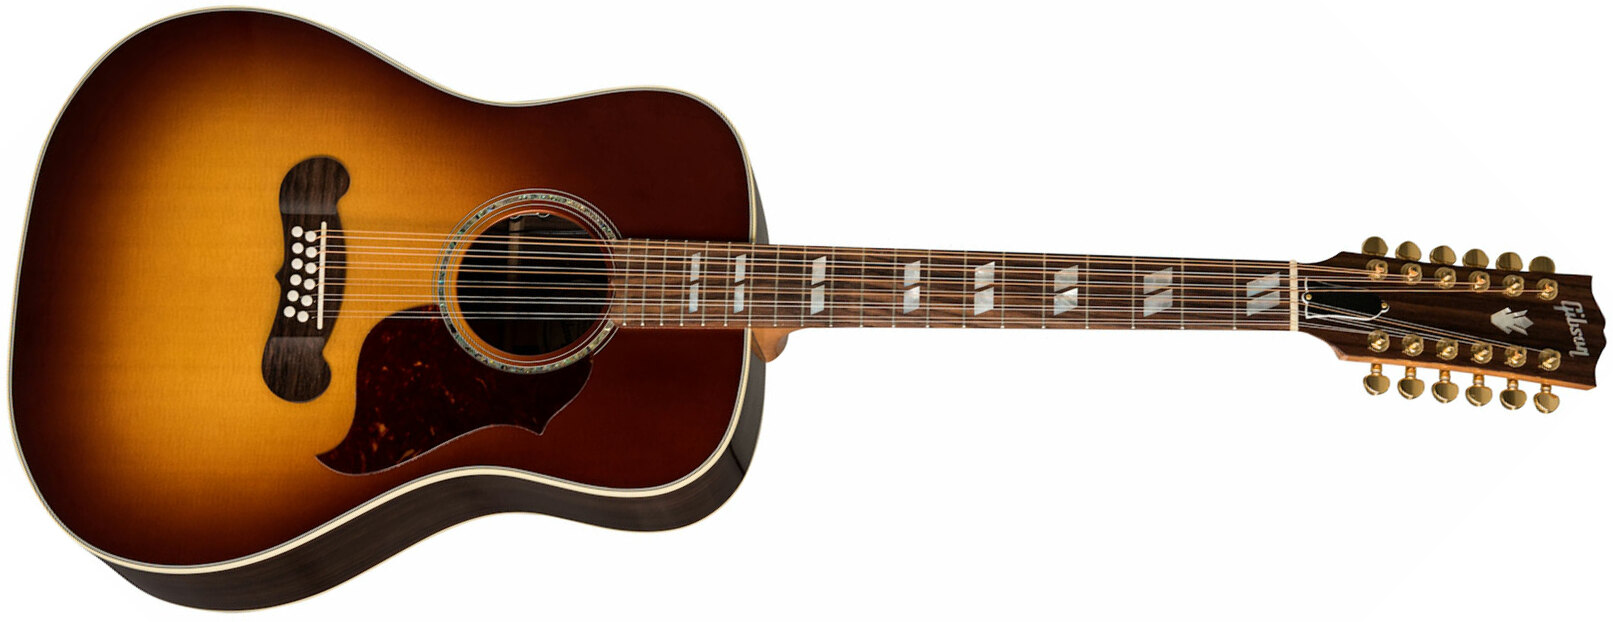 Gibson Songwriter 12-string 2019 Dreadnought 12c Epicea Palissandre Rw - Rosewood Burst - Guitare Electro Acoustique - Main picture